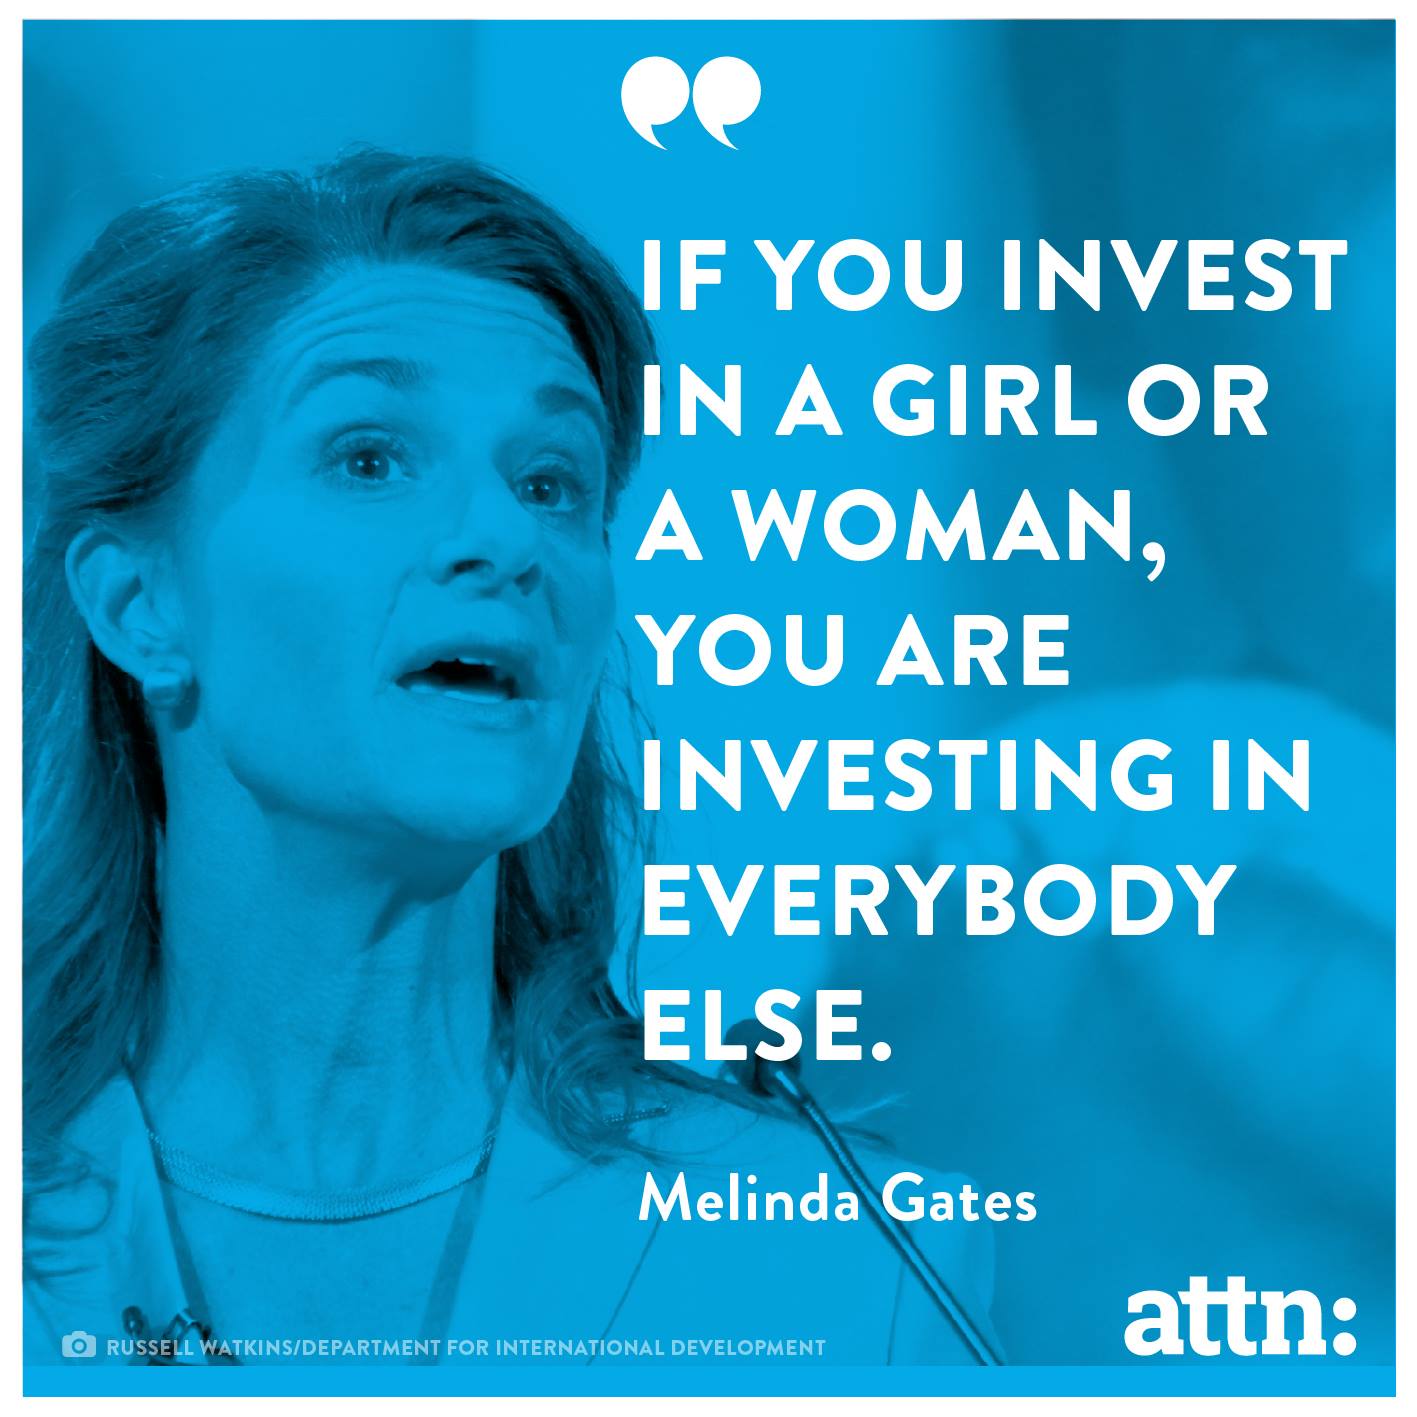 Well said feminist quote by Melinda Gates